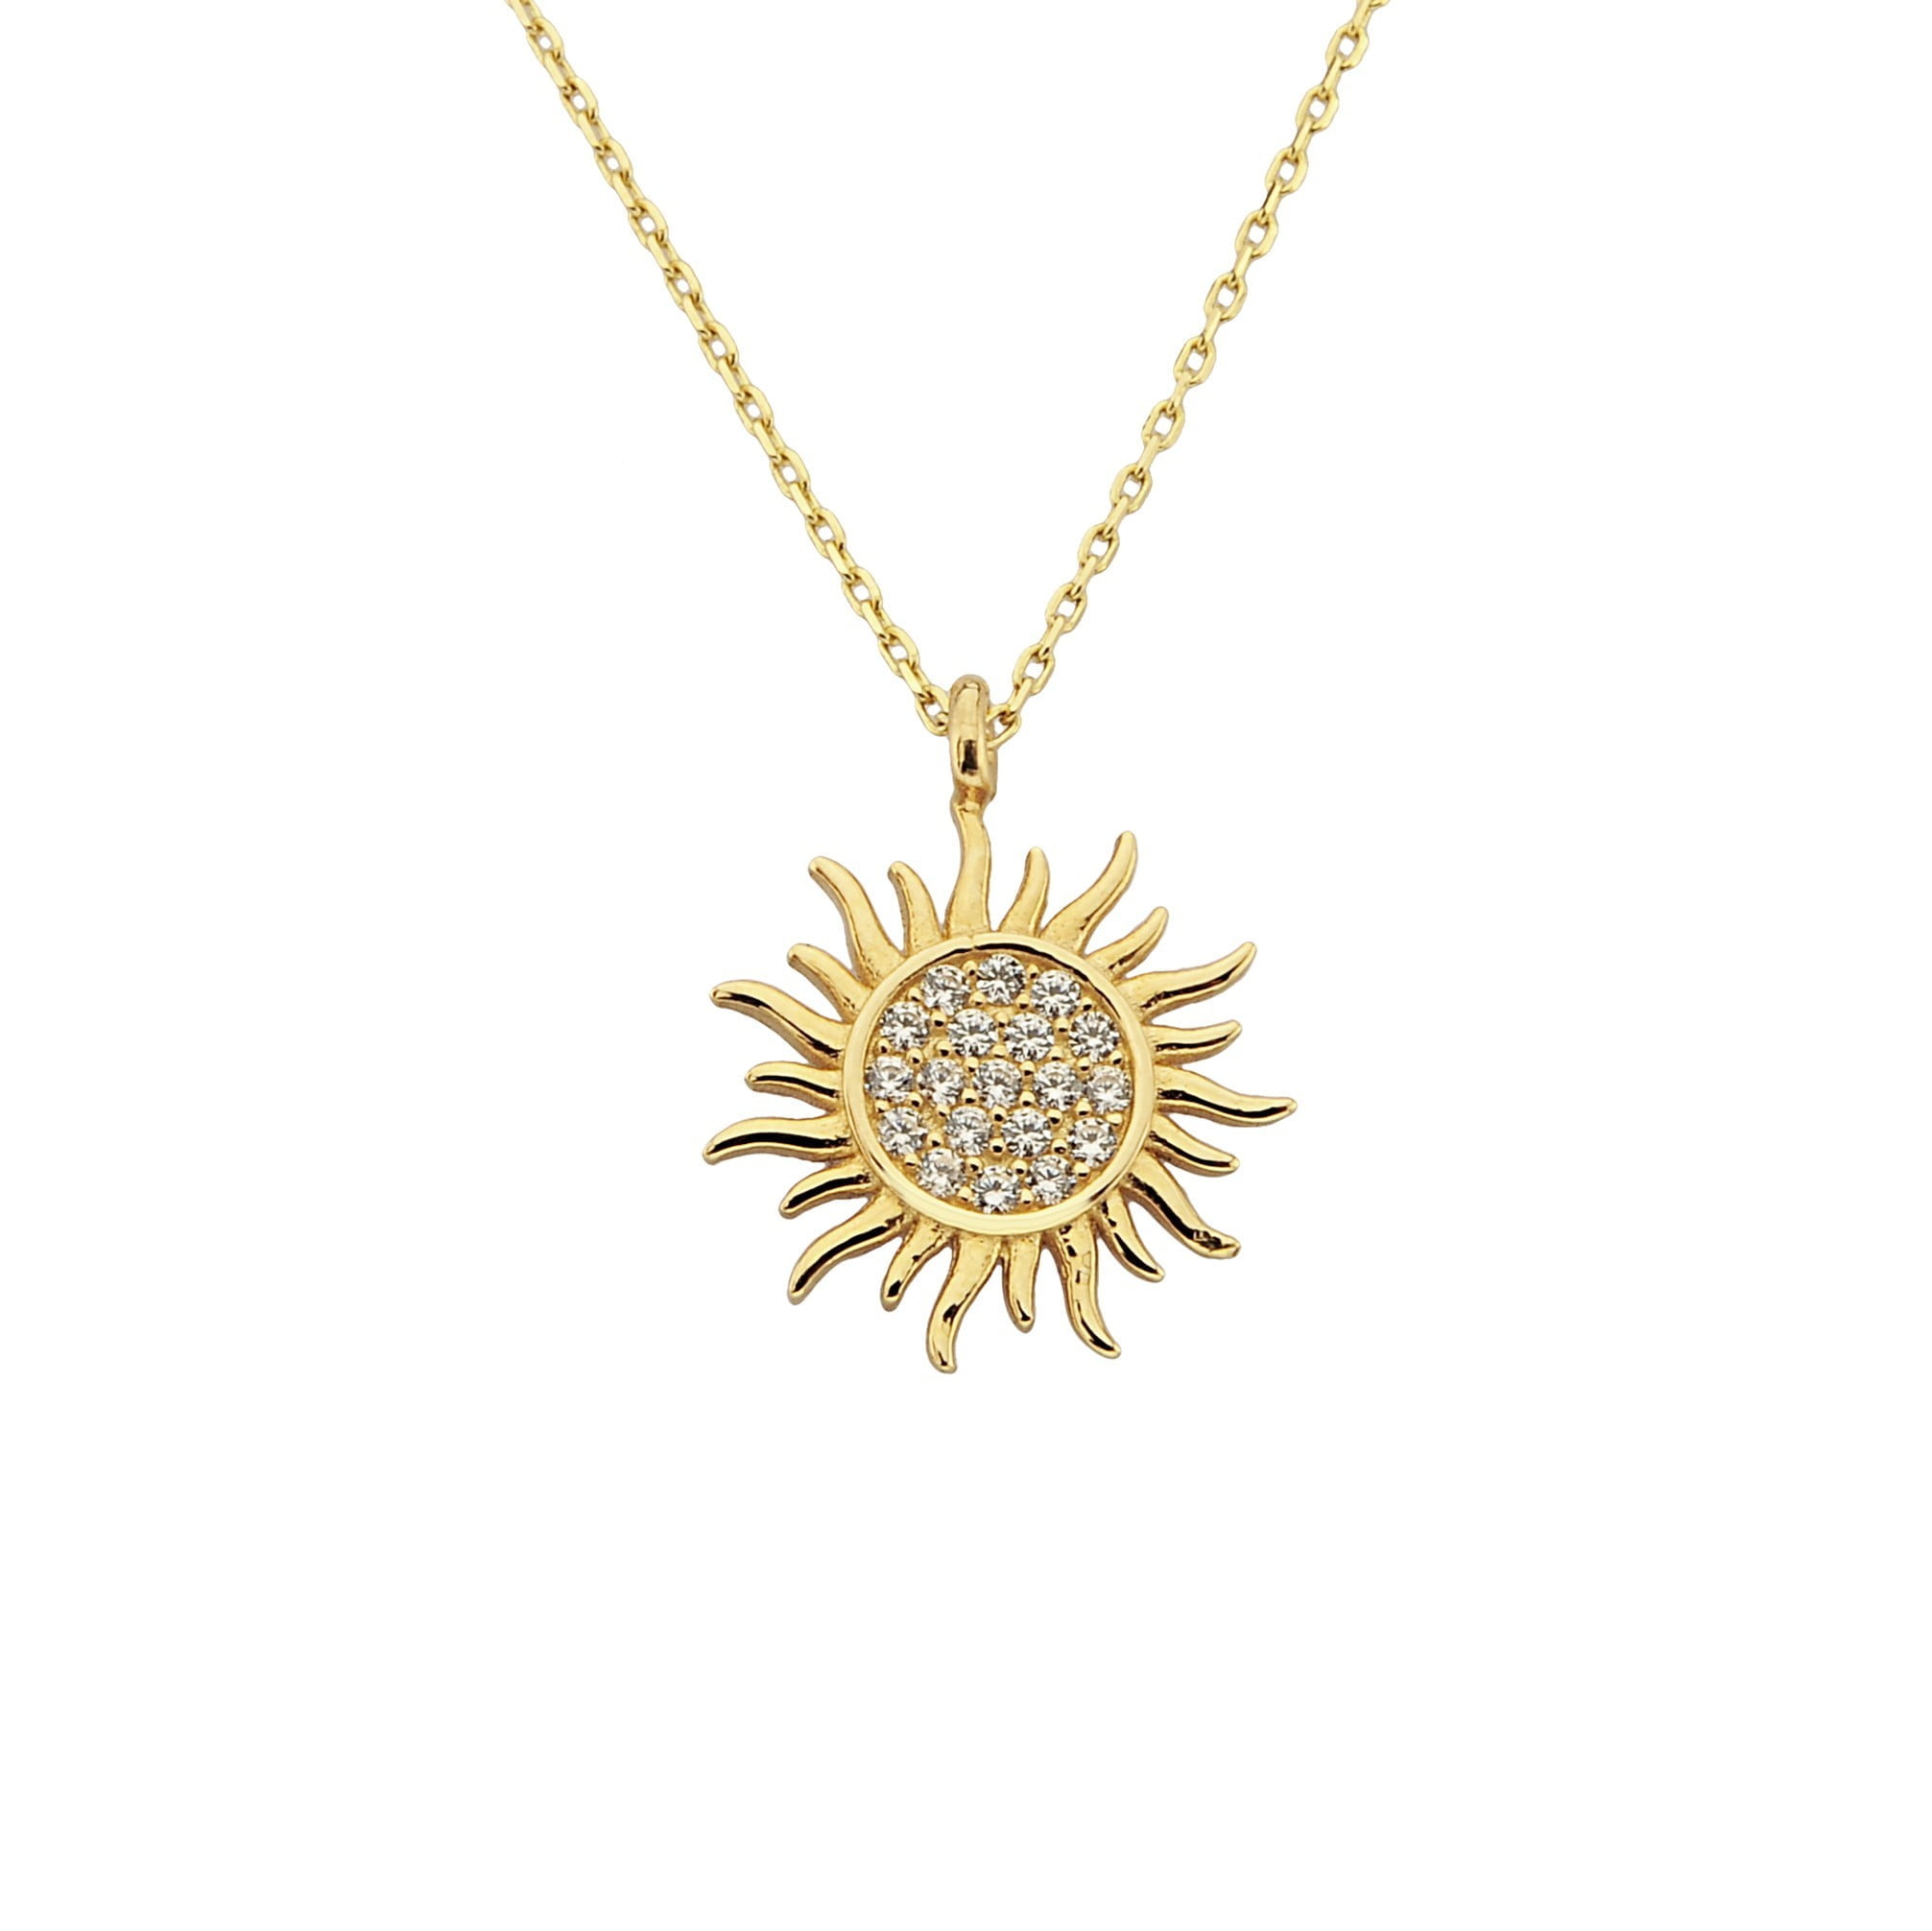 Details about   14K Gold Charm Sun Smiling Sunshine Pendant Jewelry